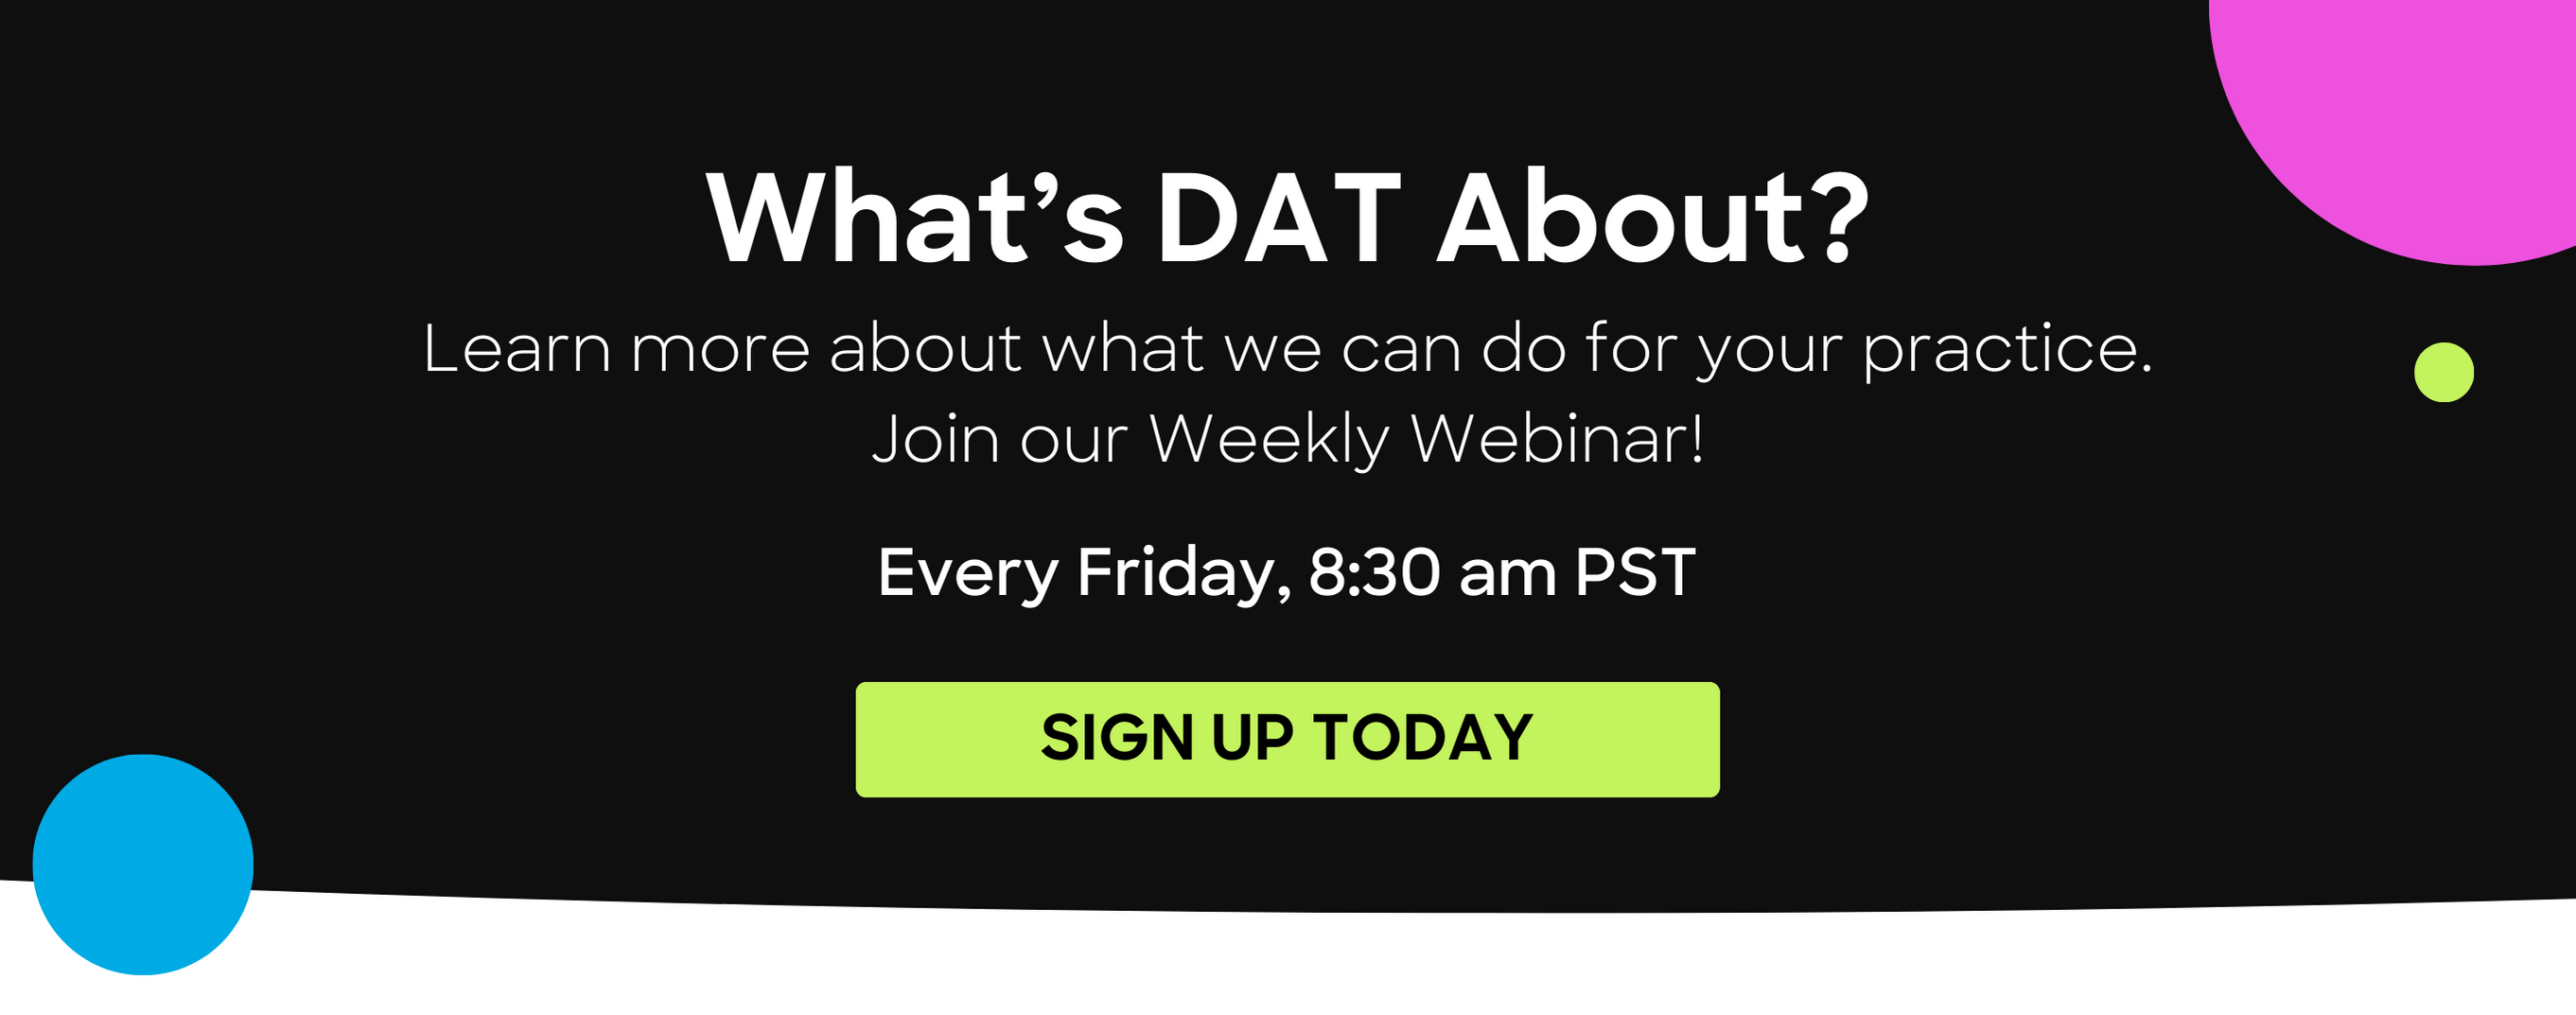 What's DAT About? Join our Weekly Webinar and find out how Dental A Team can help grow your practice! Every Friday at 8:30 am PST